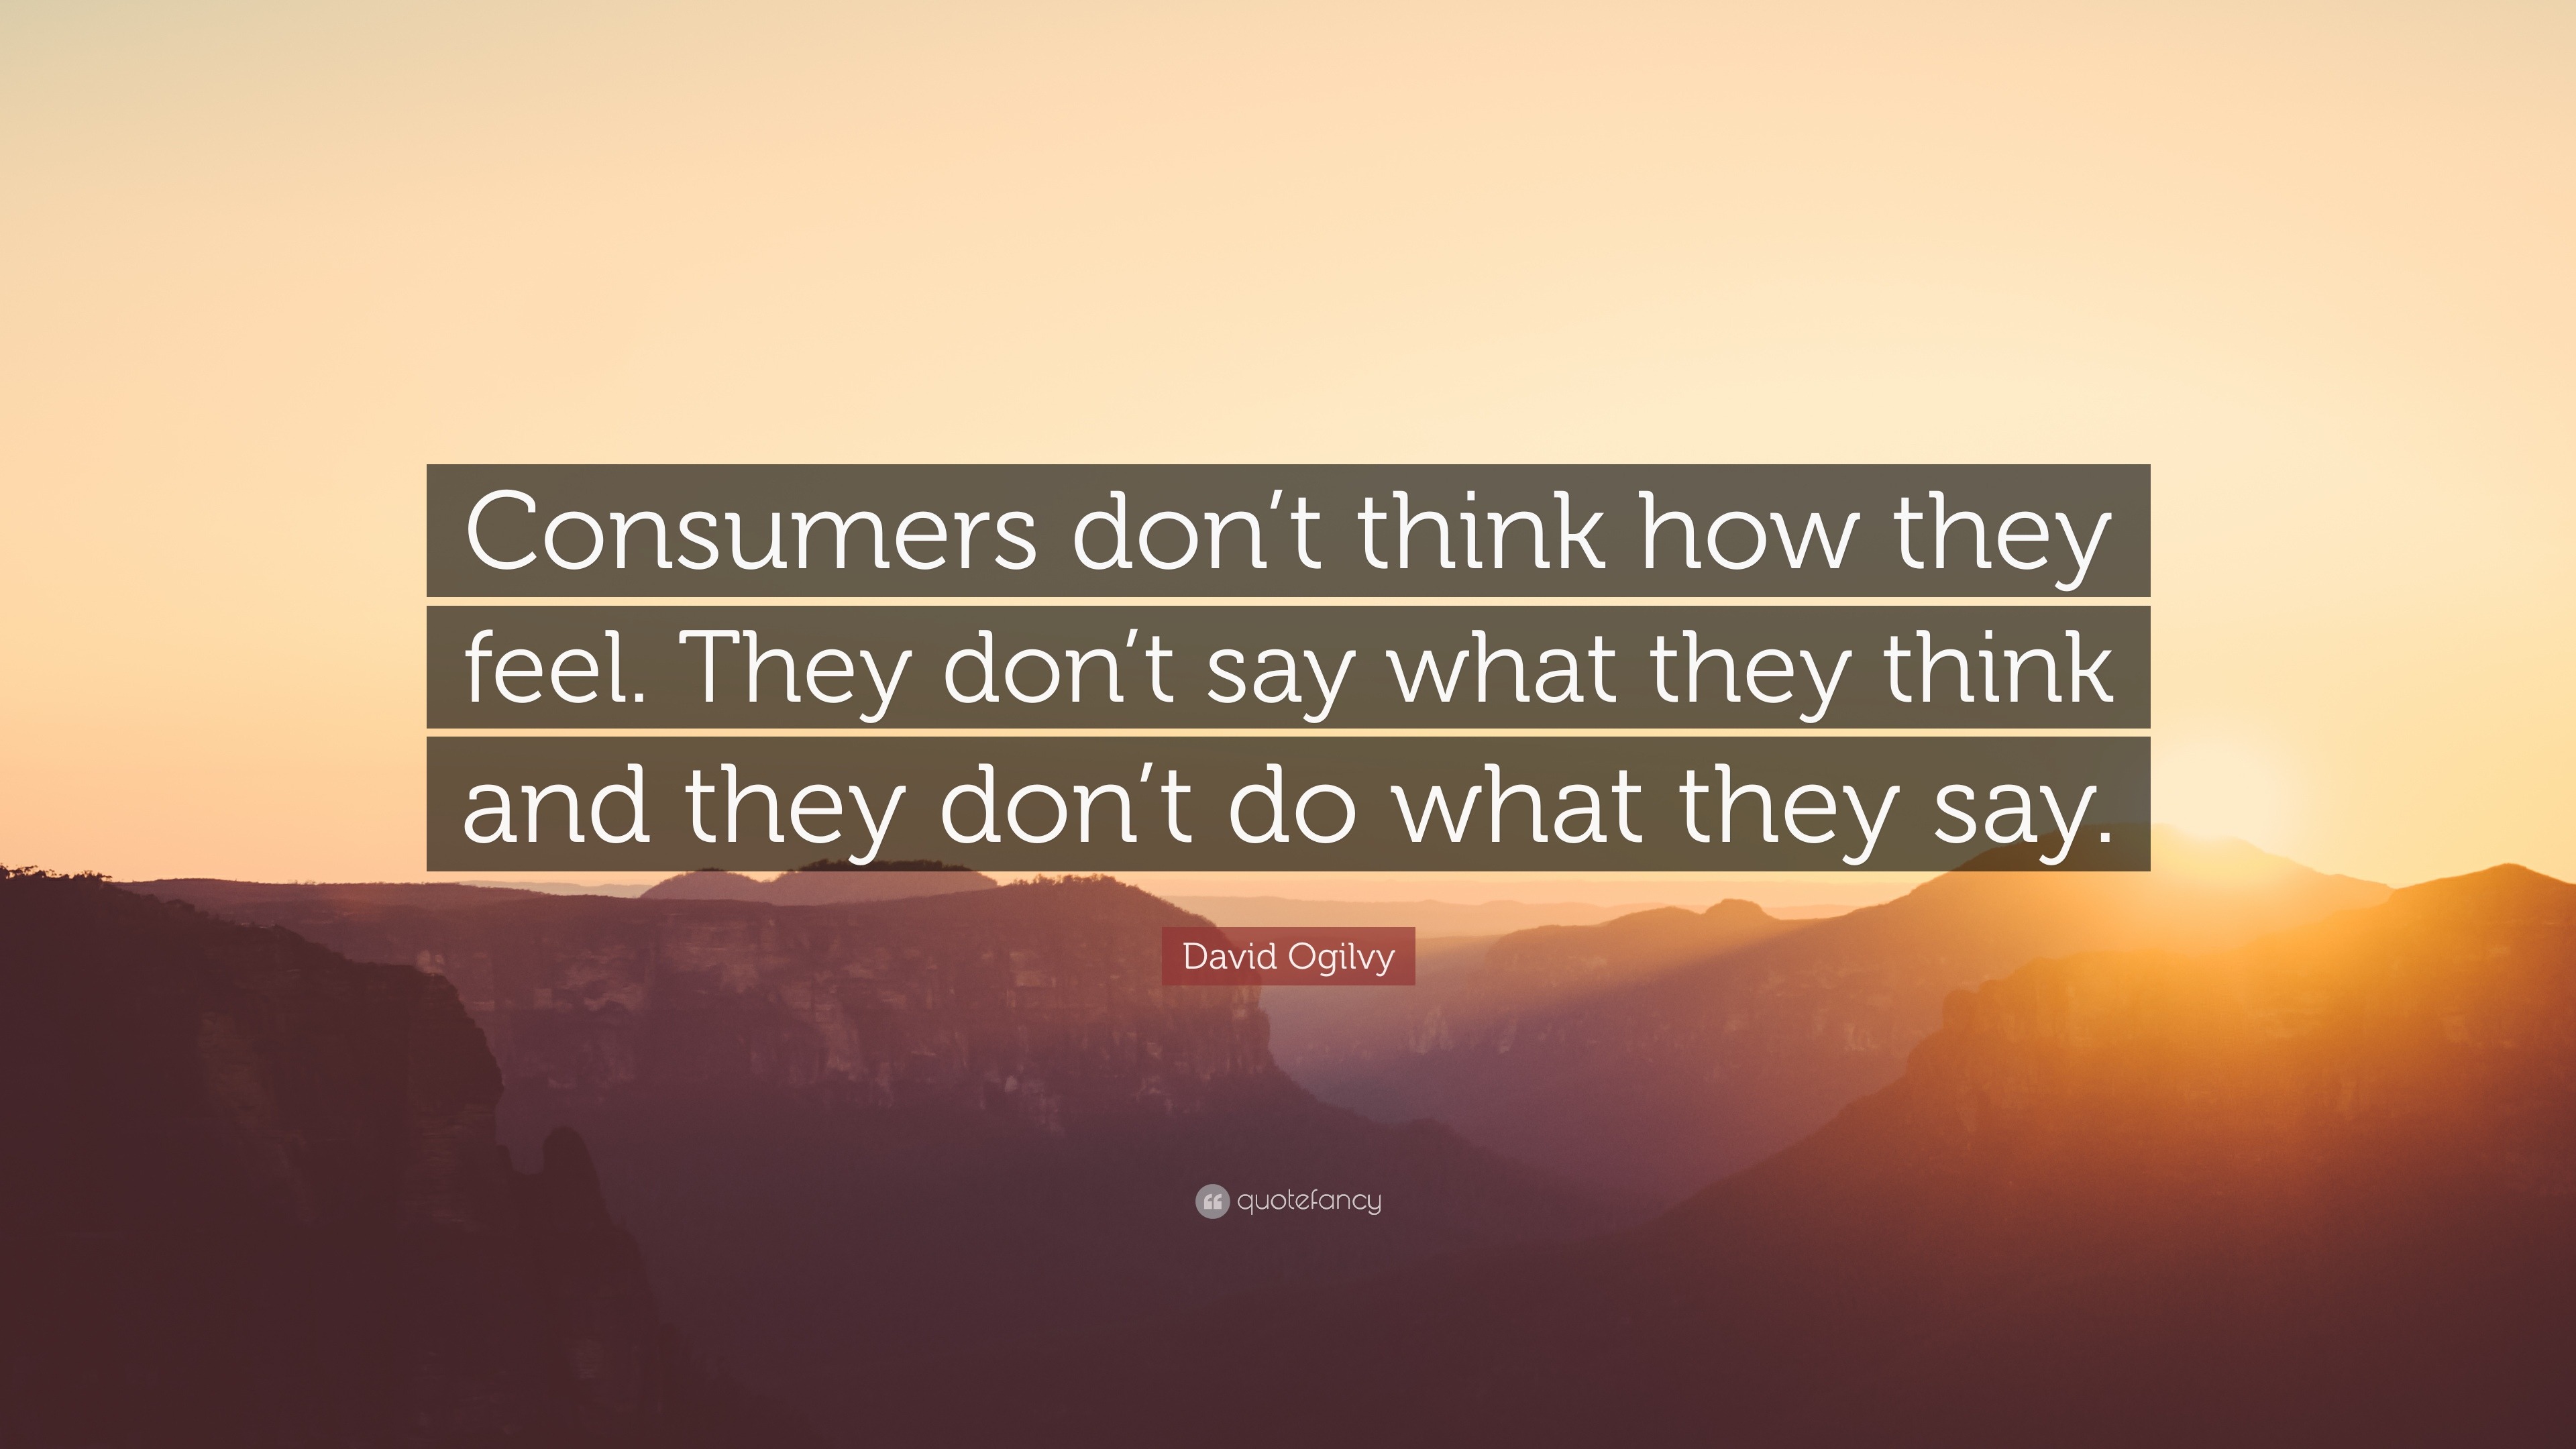 David Ogilvy Quote Consumers Don T Think How They Feel They Don T Say What They Think And They Don T Do What They Say 7 Wallpapers Quotefancy